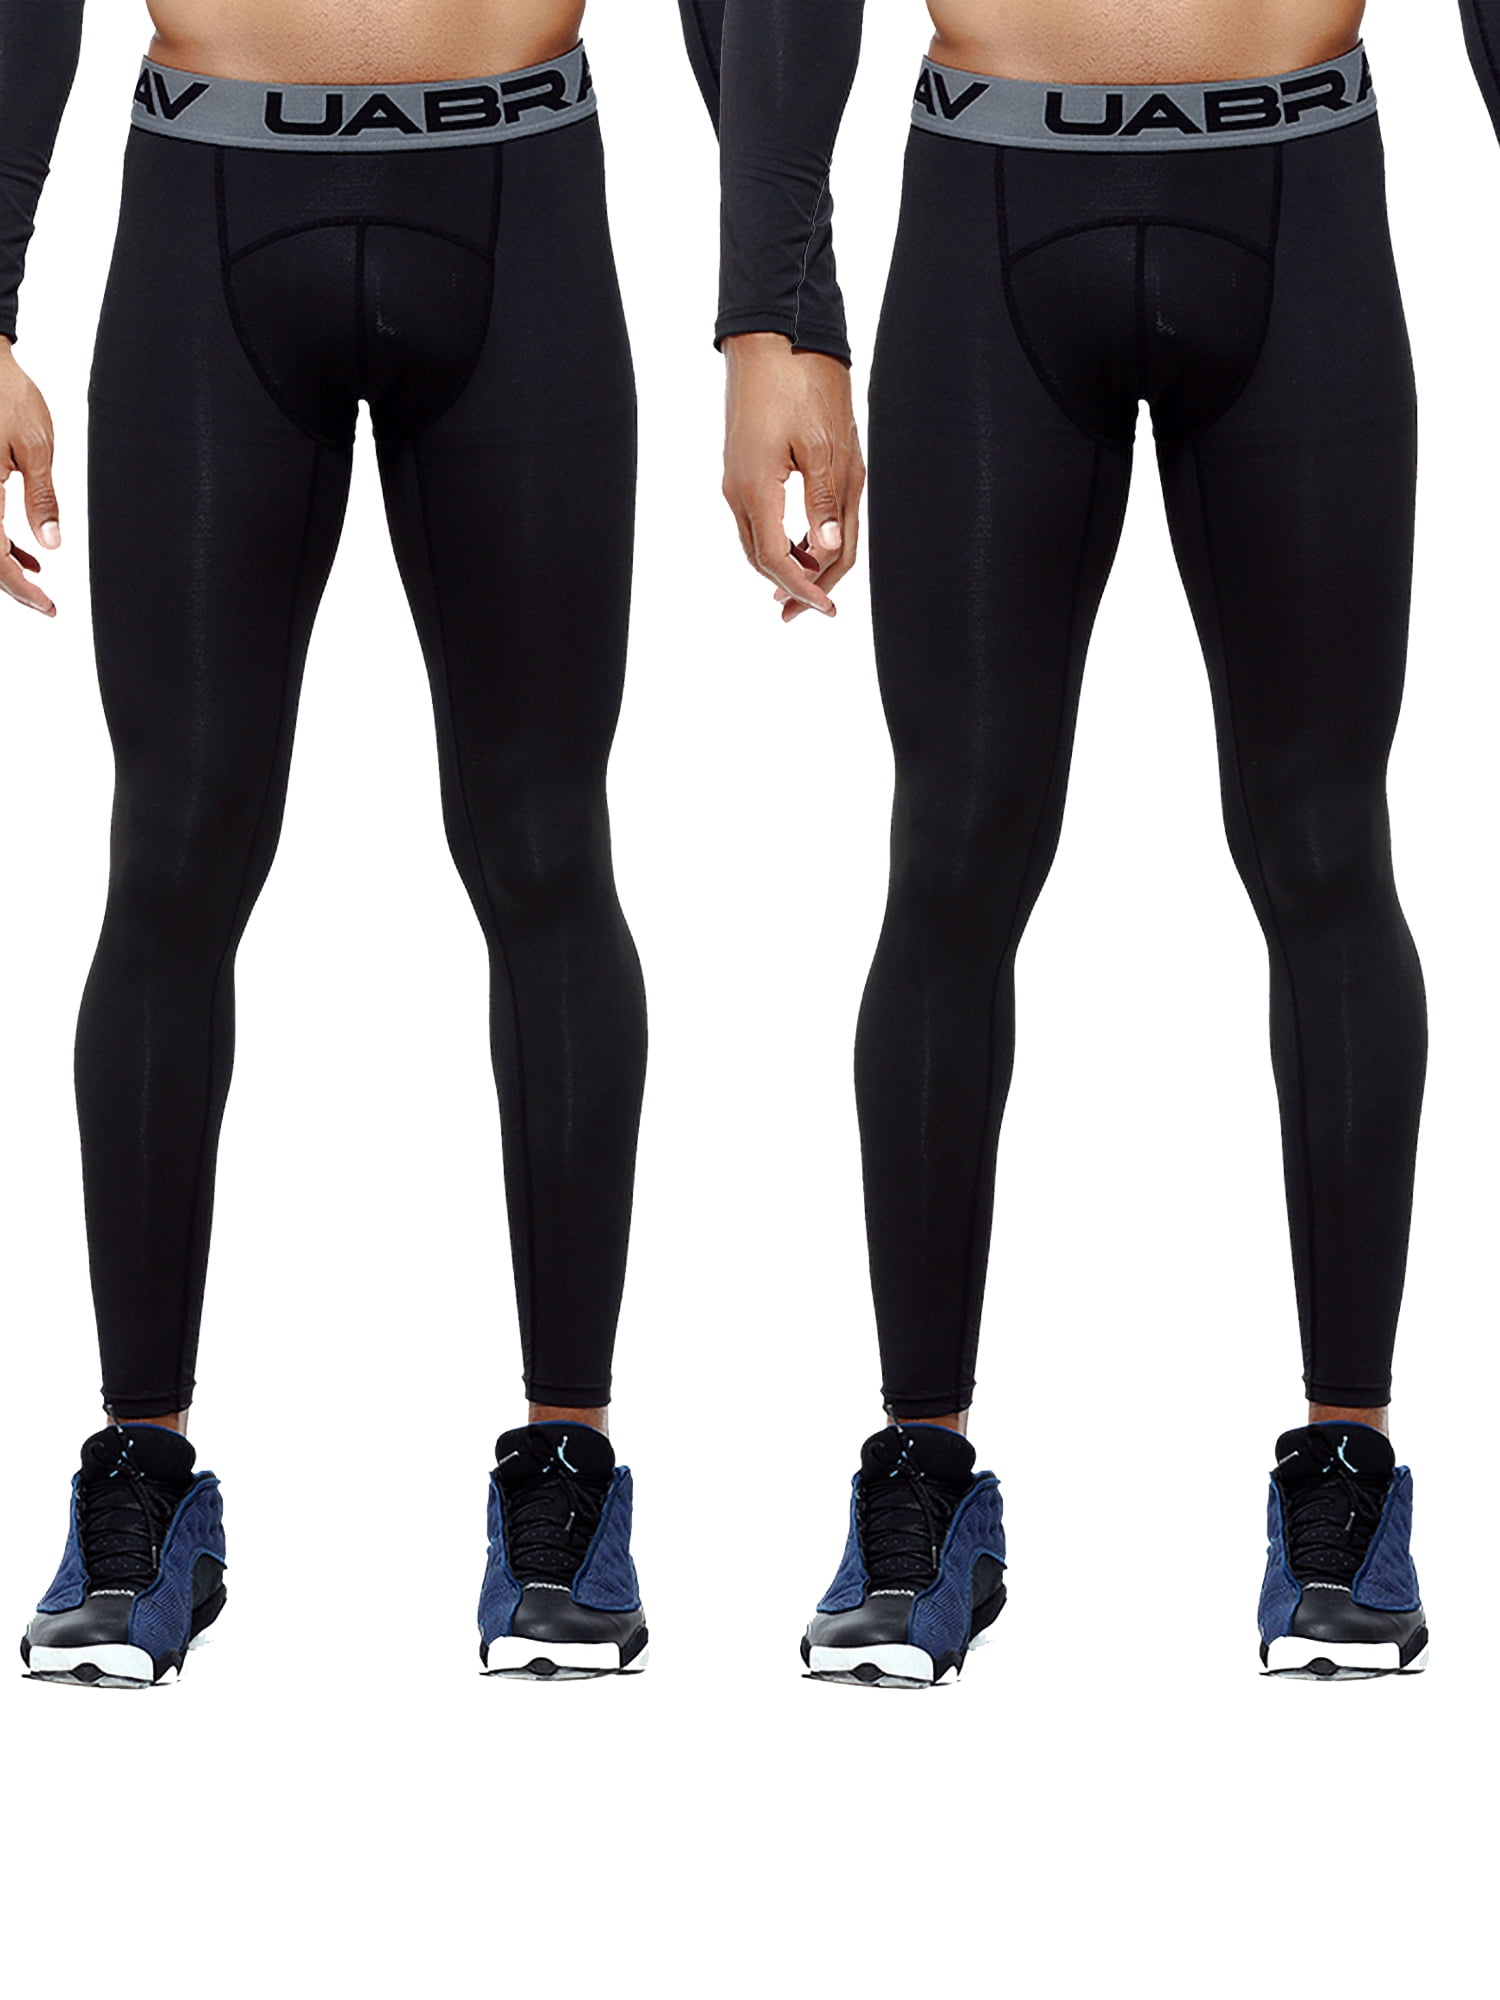 Men’s Compression Leggings Dry Cool Sports Gym Pants Base layer Running Slim fit 